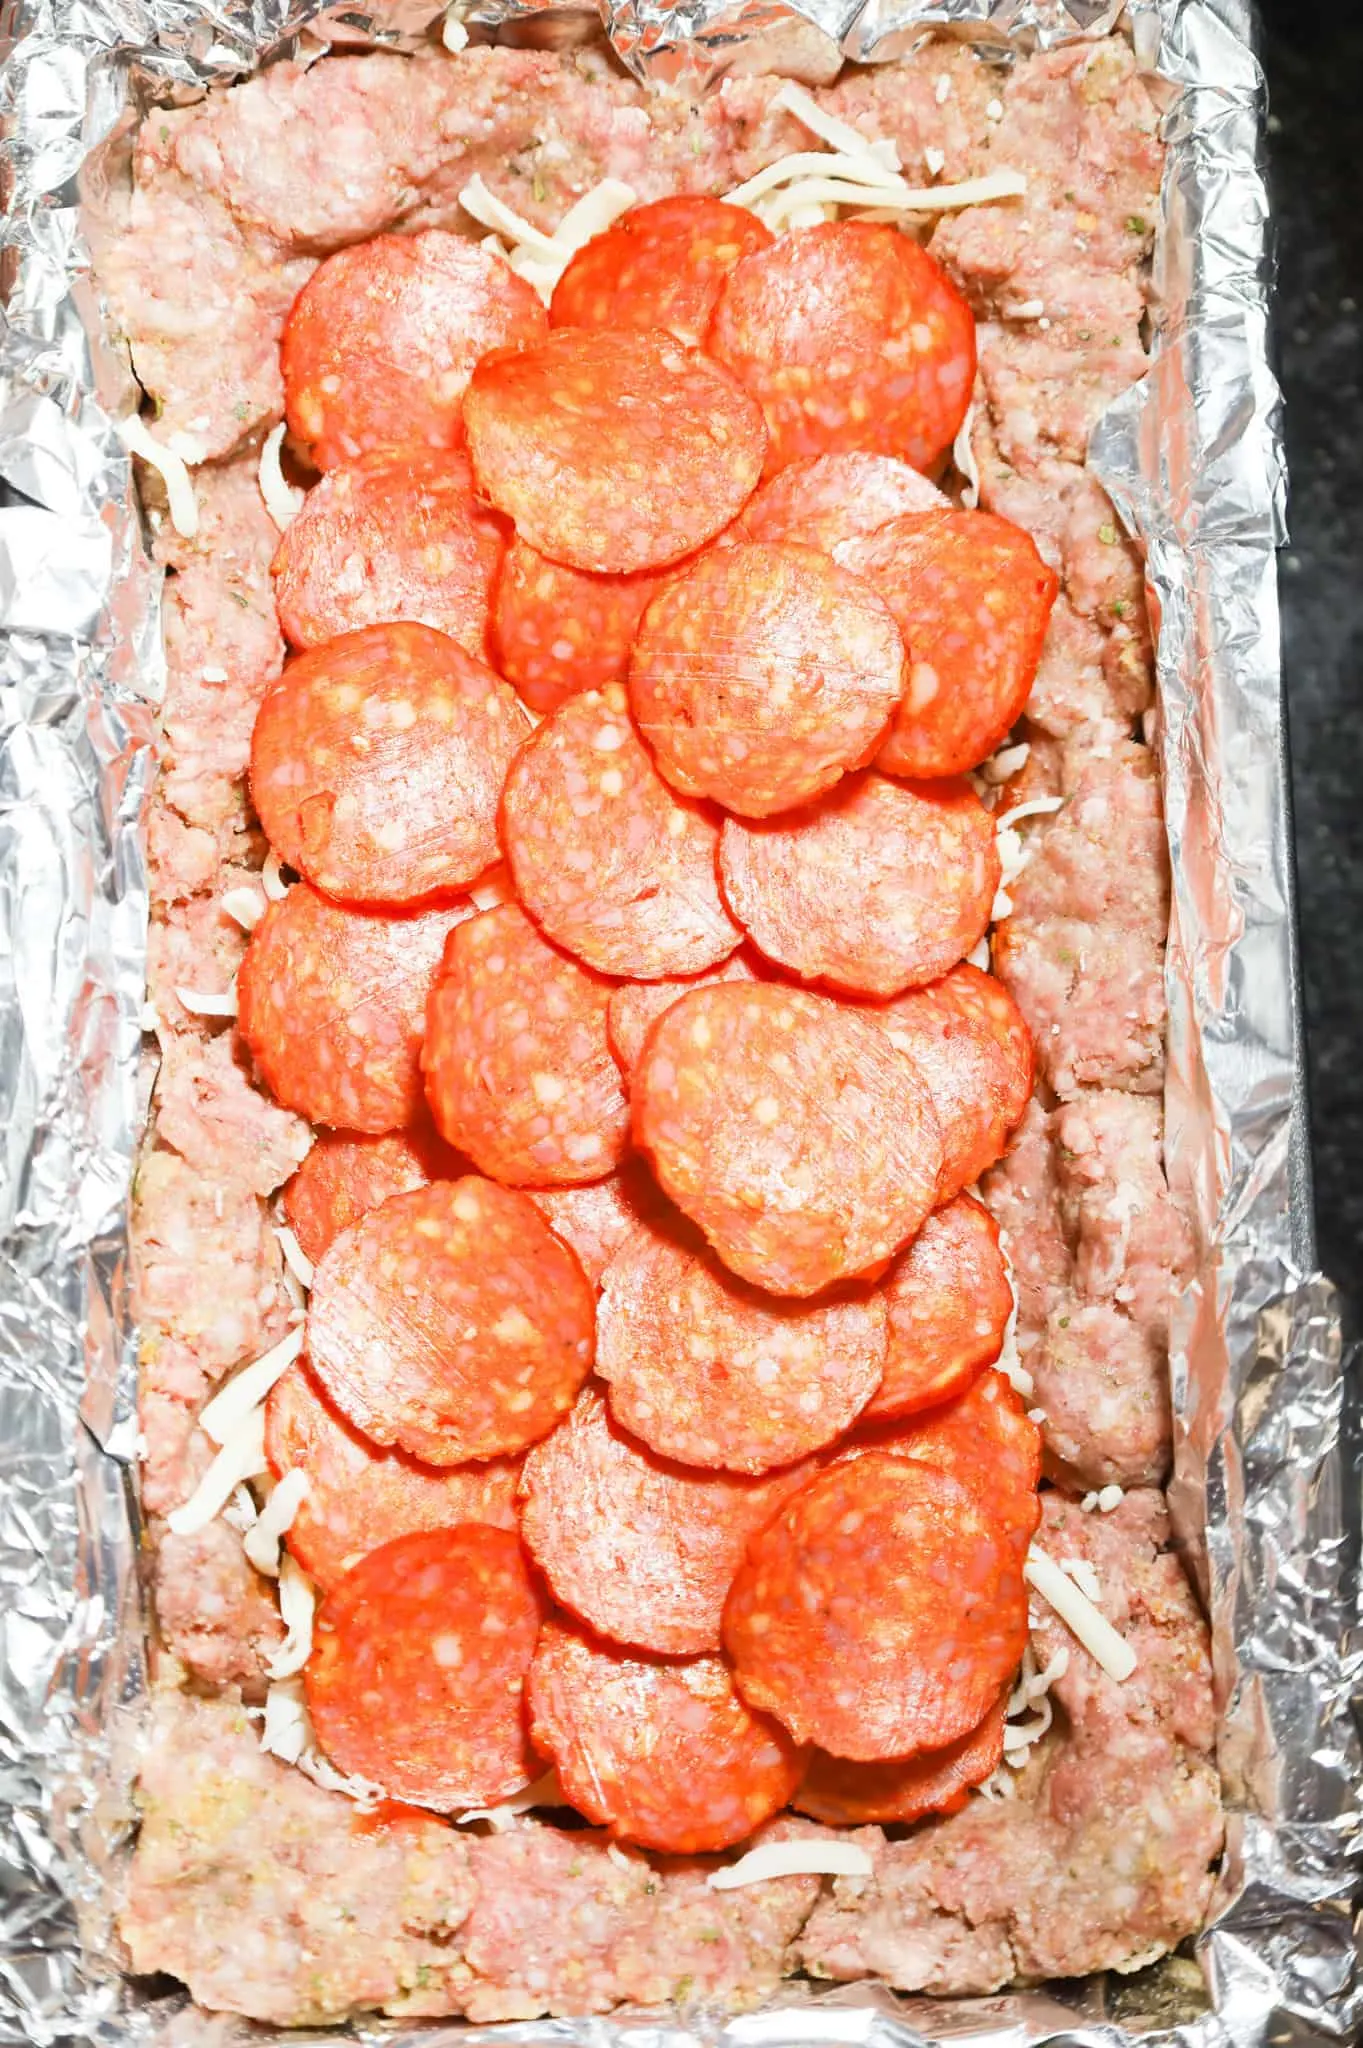 pepperoni slices in the center of a meatloaf